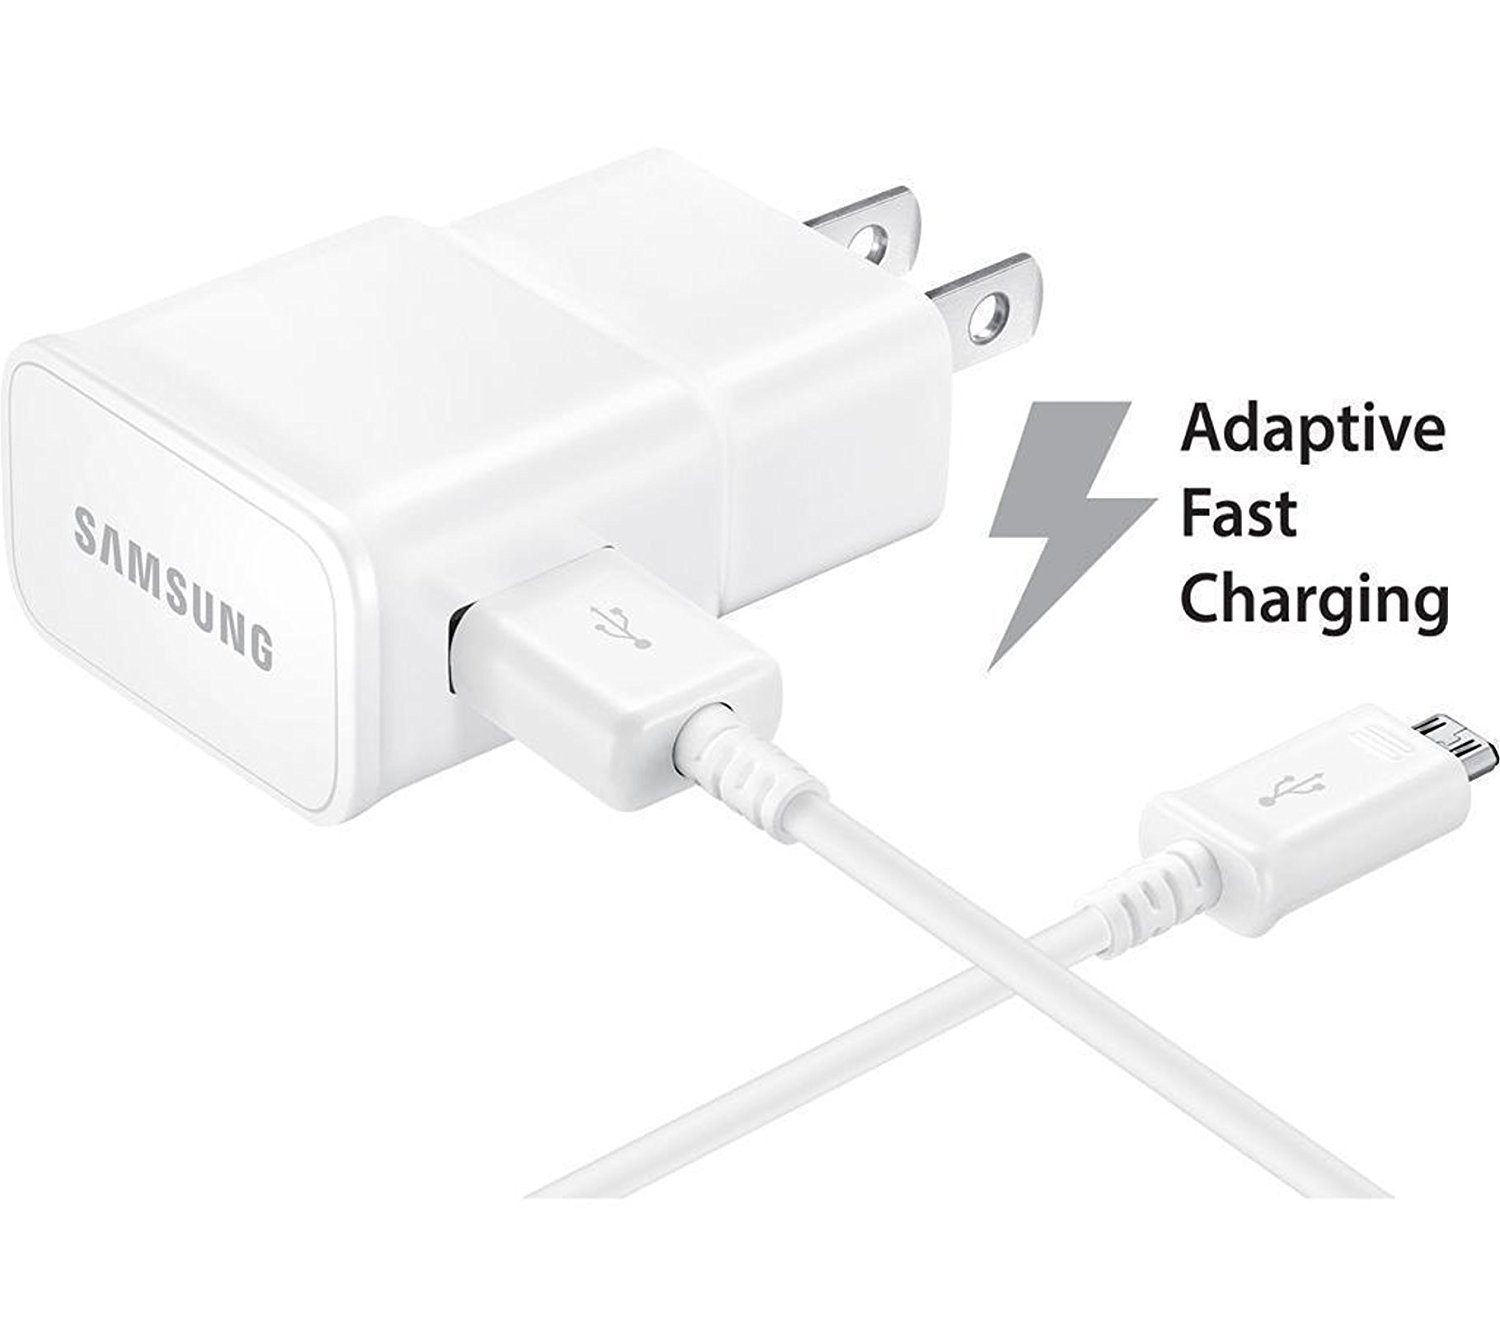 SAMSUNG GALAXY GRAND PRIME ADAPTIVE FAST CHARGER MICRO USB CABLE KIT [1 WALL CHARGER + 5 FT MICRO USB CABLE]